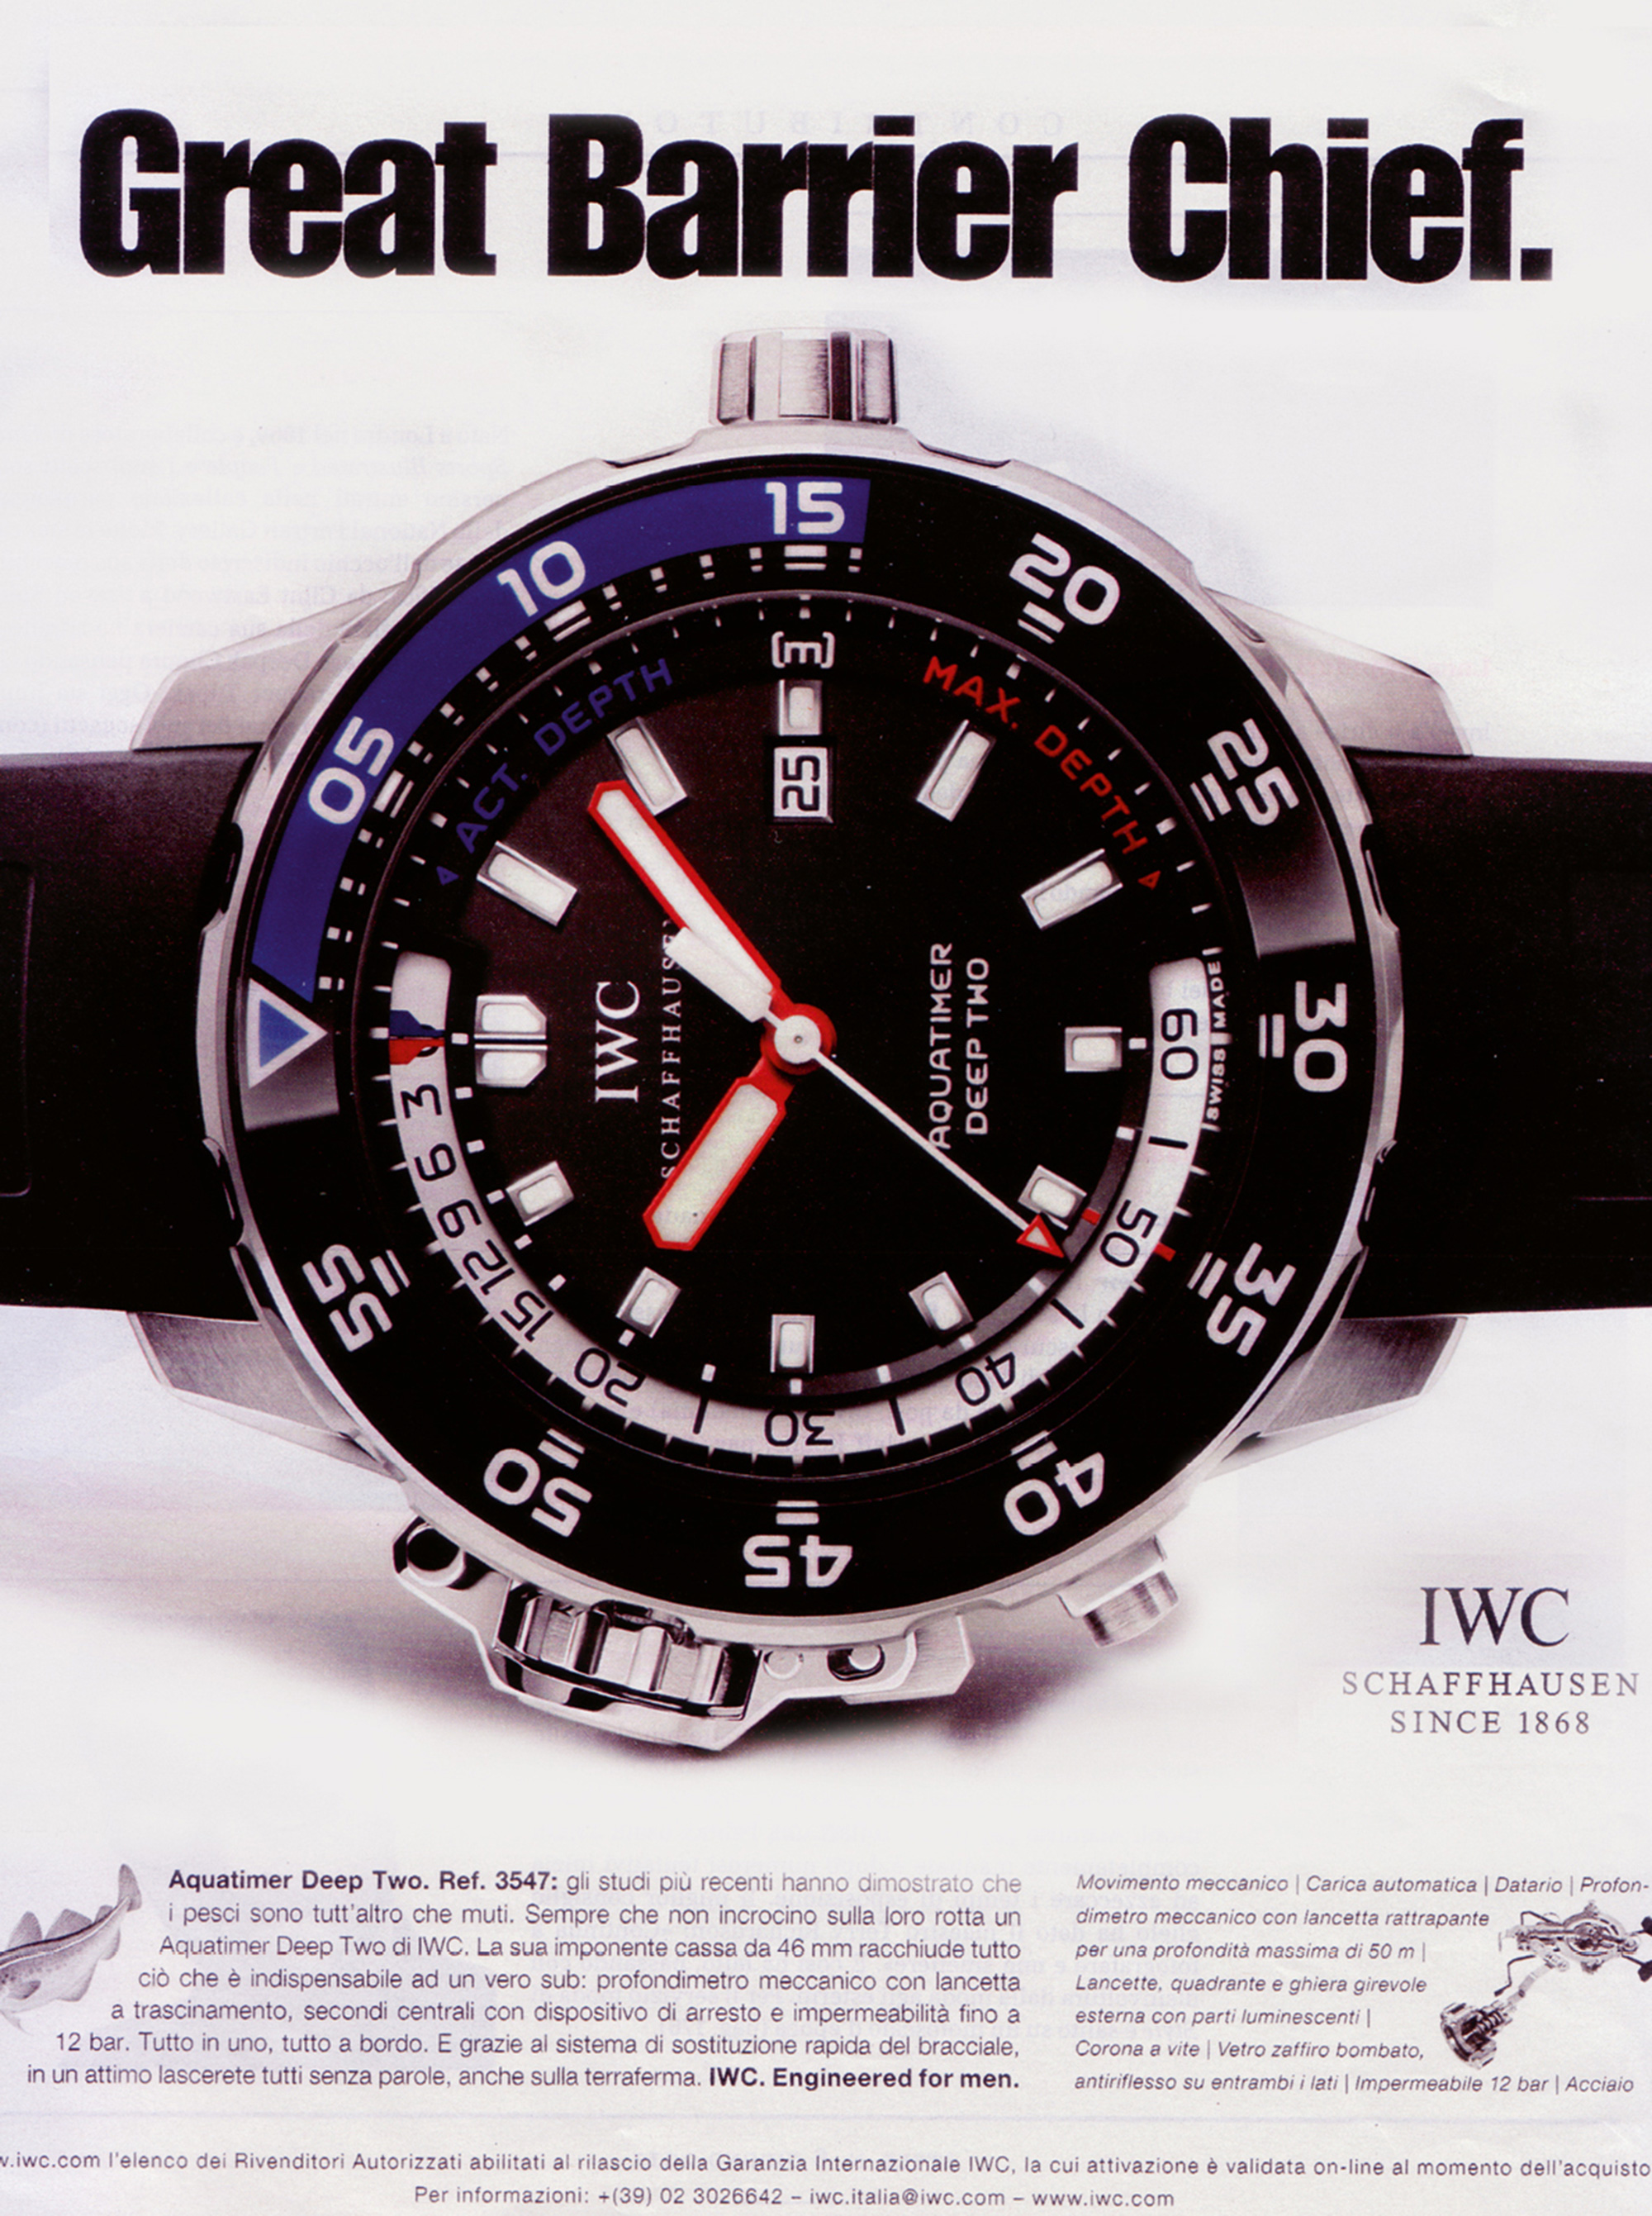 An advertisement for an IWC dive watch with the title “Great Barrier Chief.”